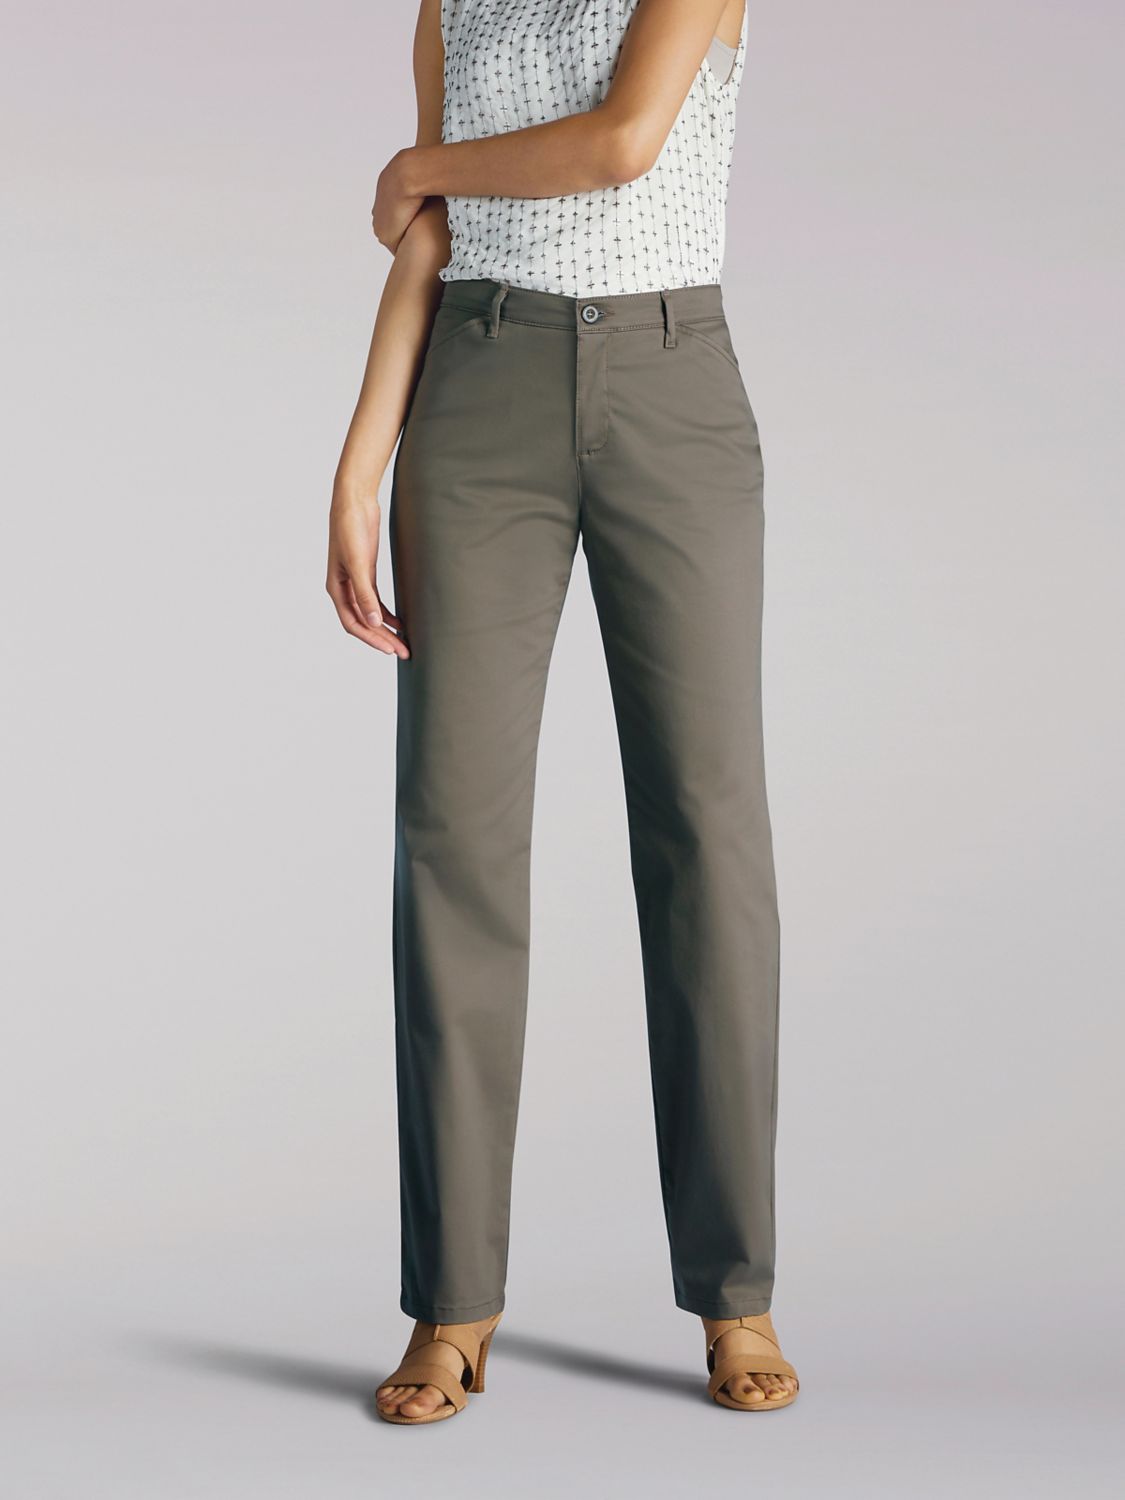 Relaxed Fit Straight Leg Pant All Day Work Pant in Deep Breen from Front View